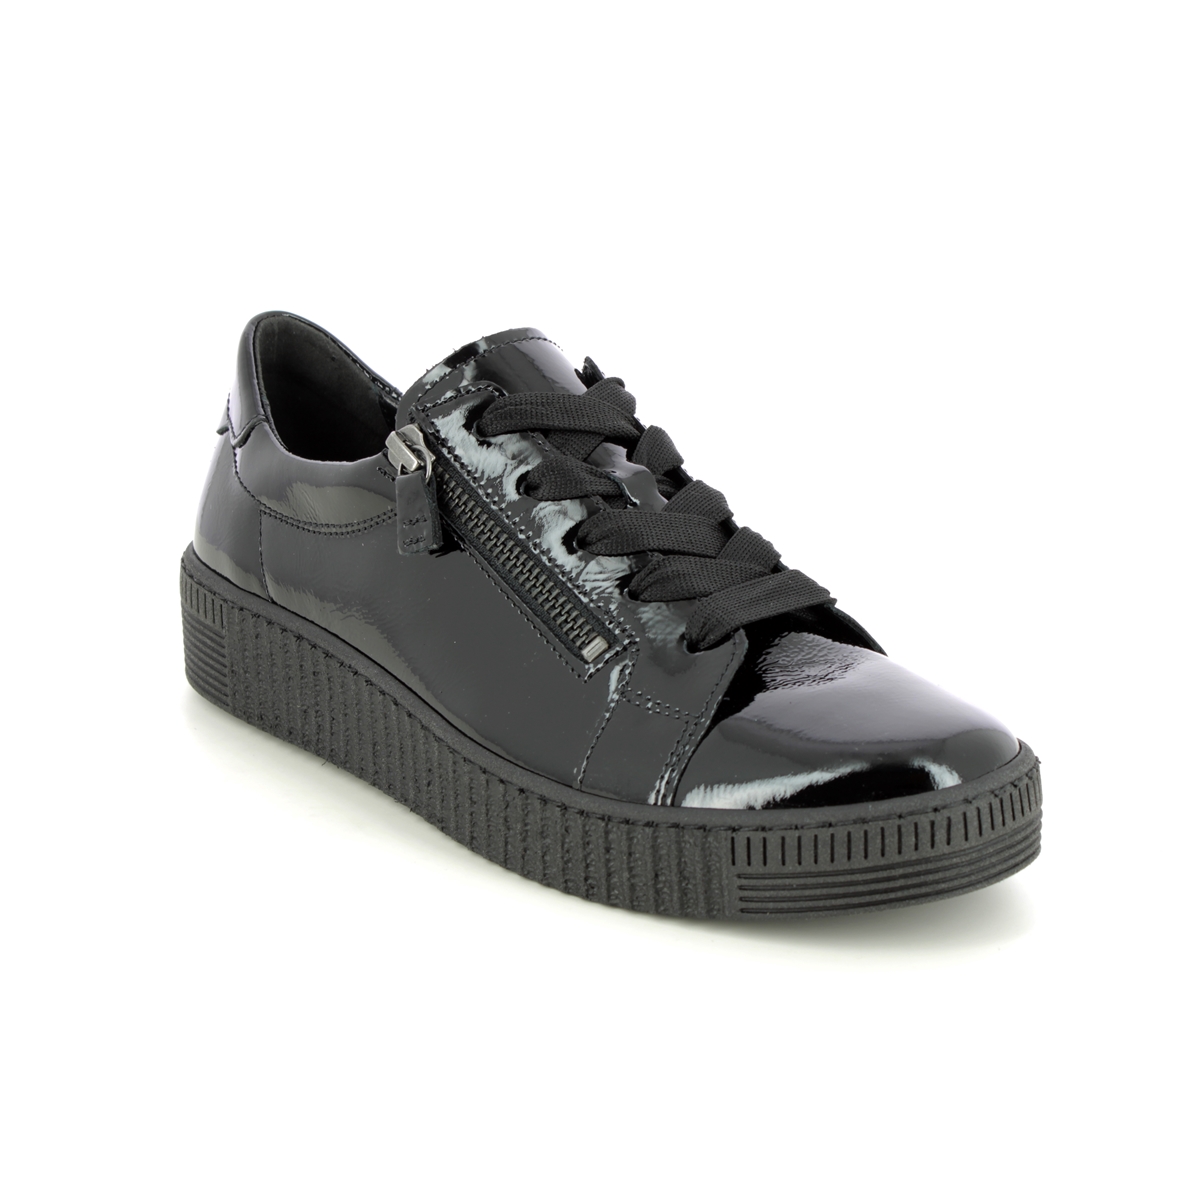 Gabor Wisdom Black Patent Womens Trainers 93.334.97 In Size 5.5 In Plain Black Patent  Womens Trainers In Soft Black Patent Leather